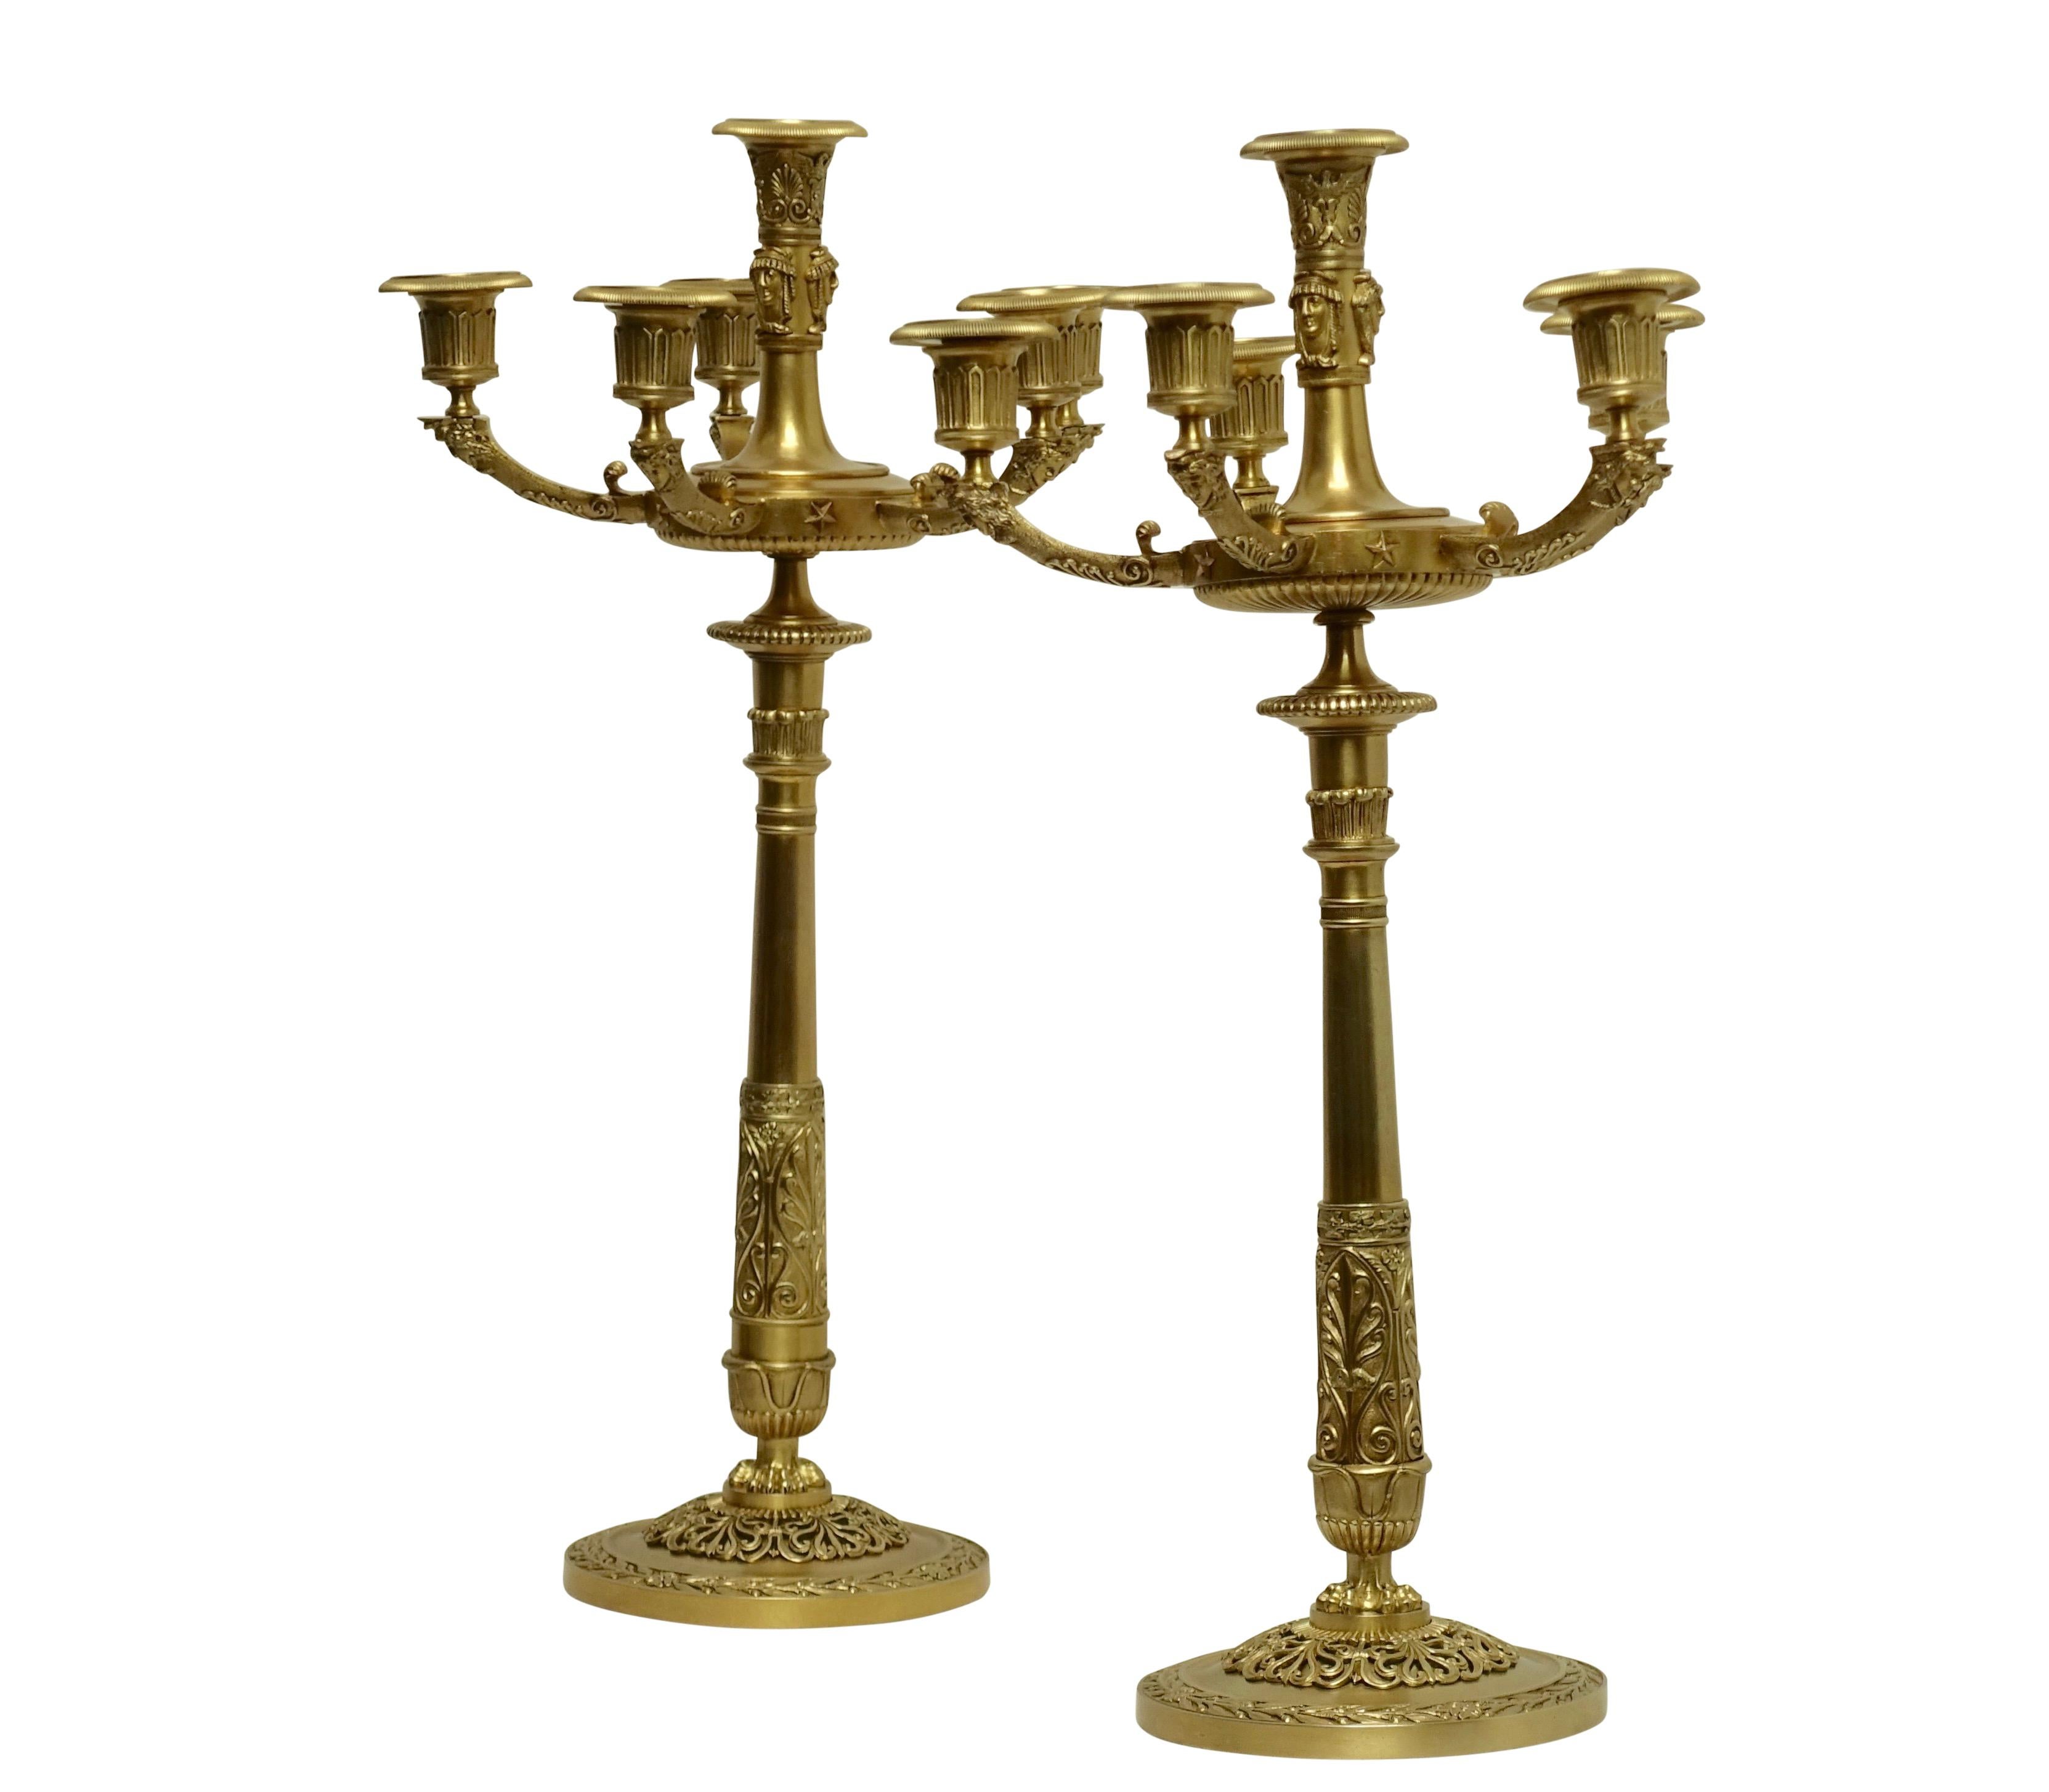 A pair of fine quality Egyptian Revival bronze candelabra with Egyptian masks around the centre candle cup and five arms with the additional candle cups. These had been electrified sometime in the first quarter of the 20th century, France, circa